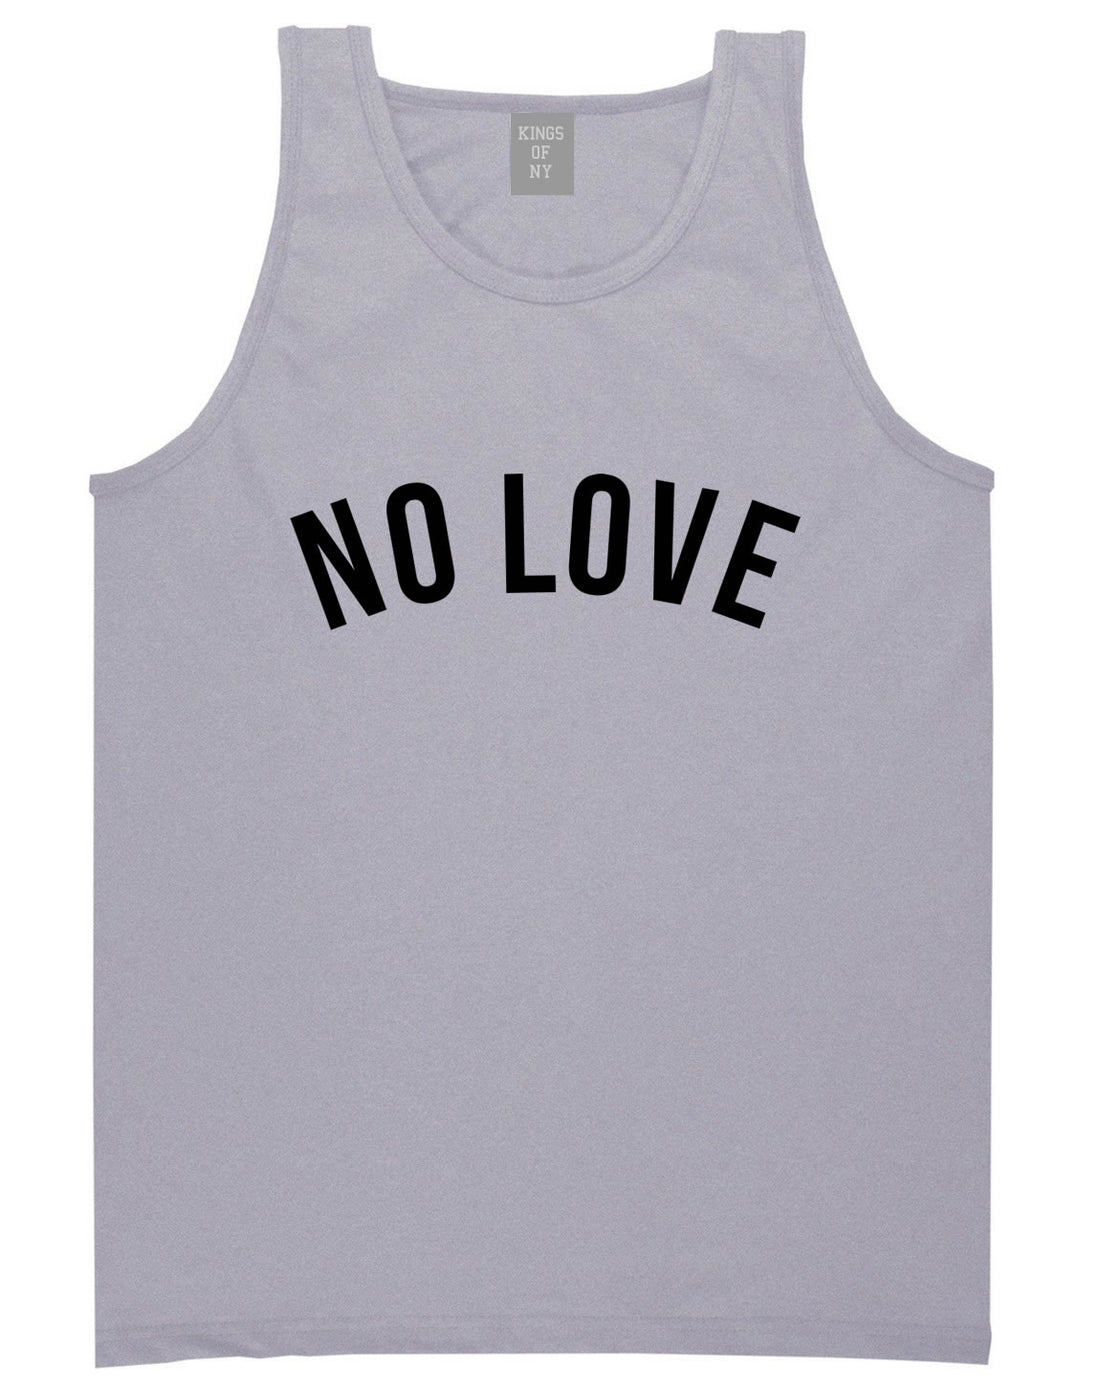 No Love Tank Top in Grey by Kings Of NY